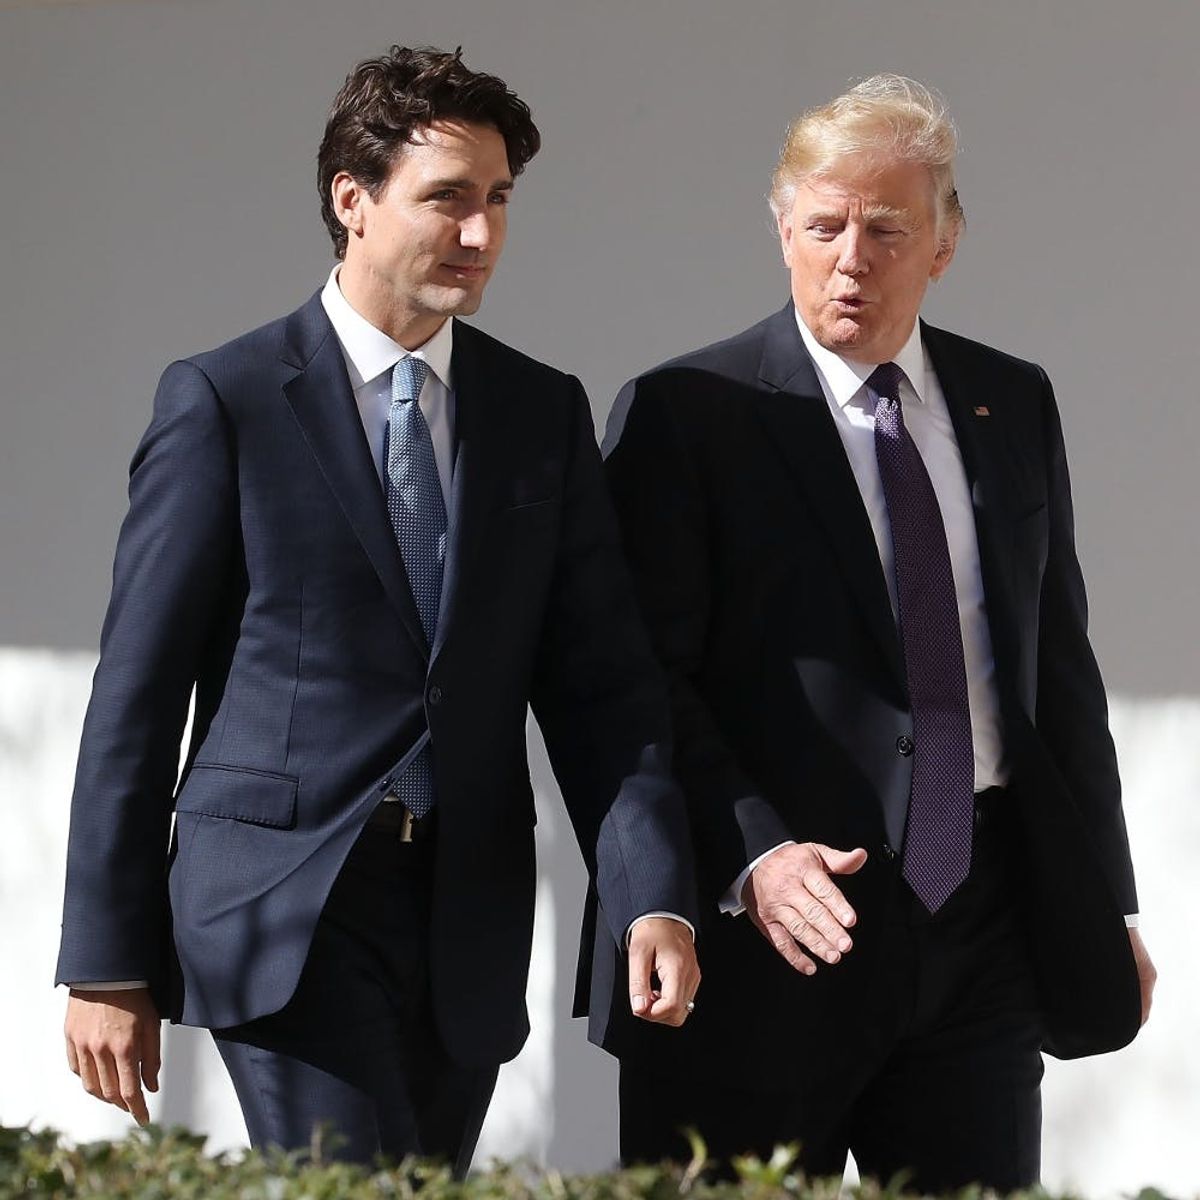 Justin Trudeau (Unintentionally?) Shaded Donald Trump and People Are FLIPPING OUT